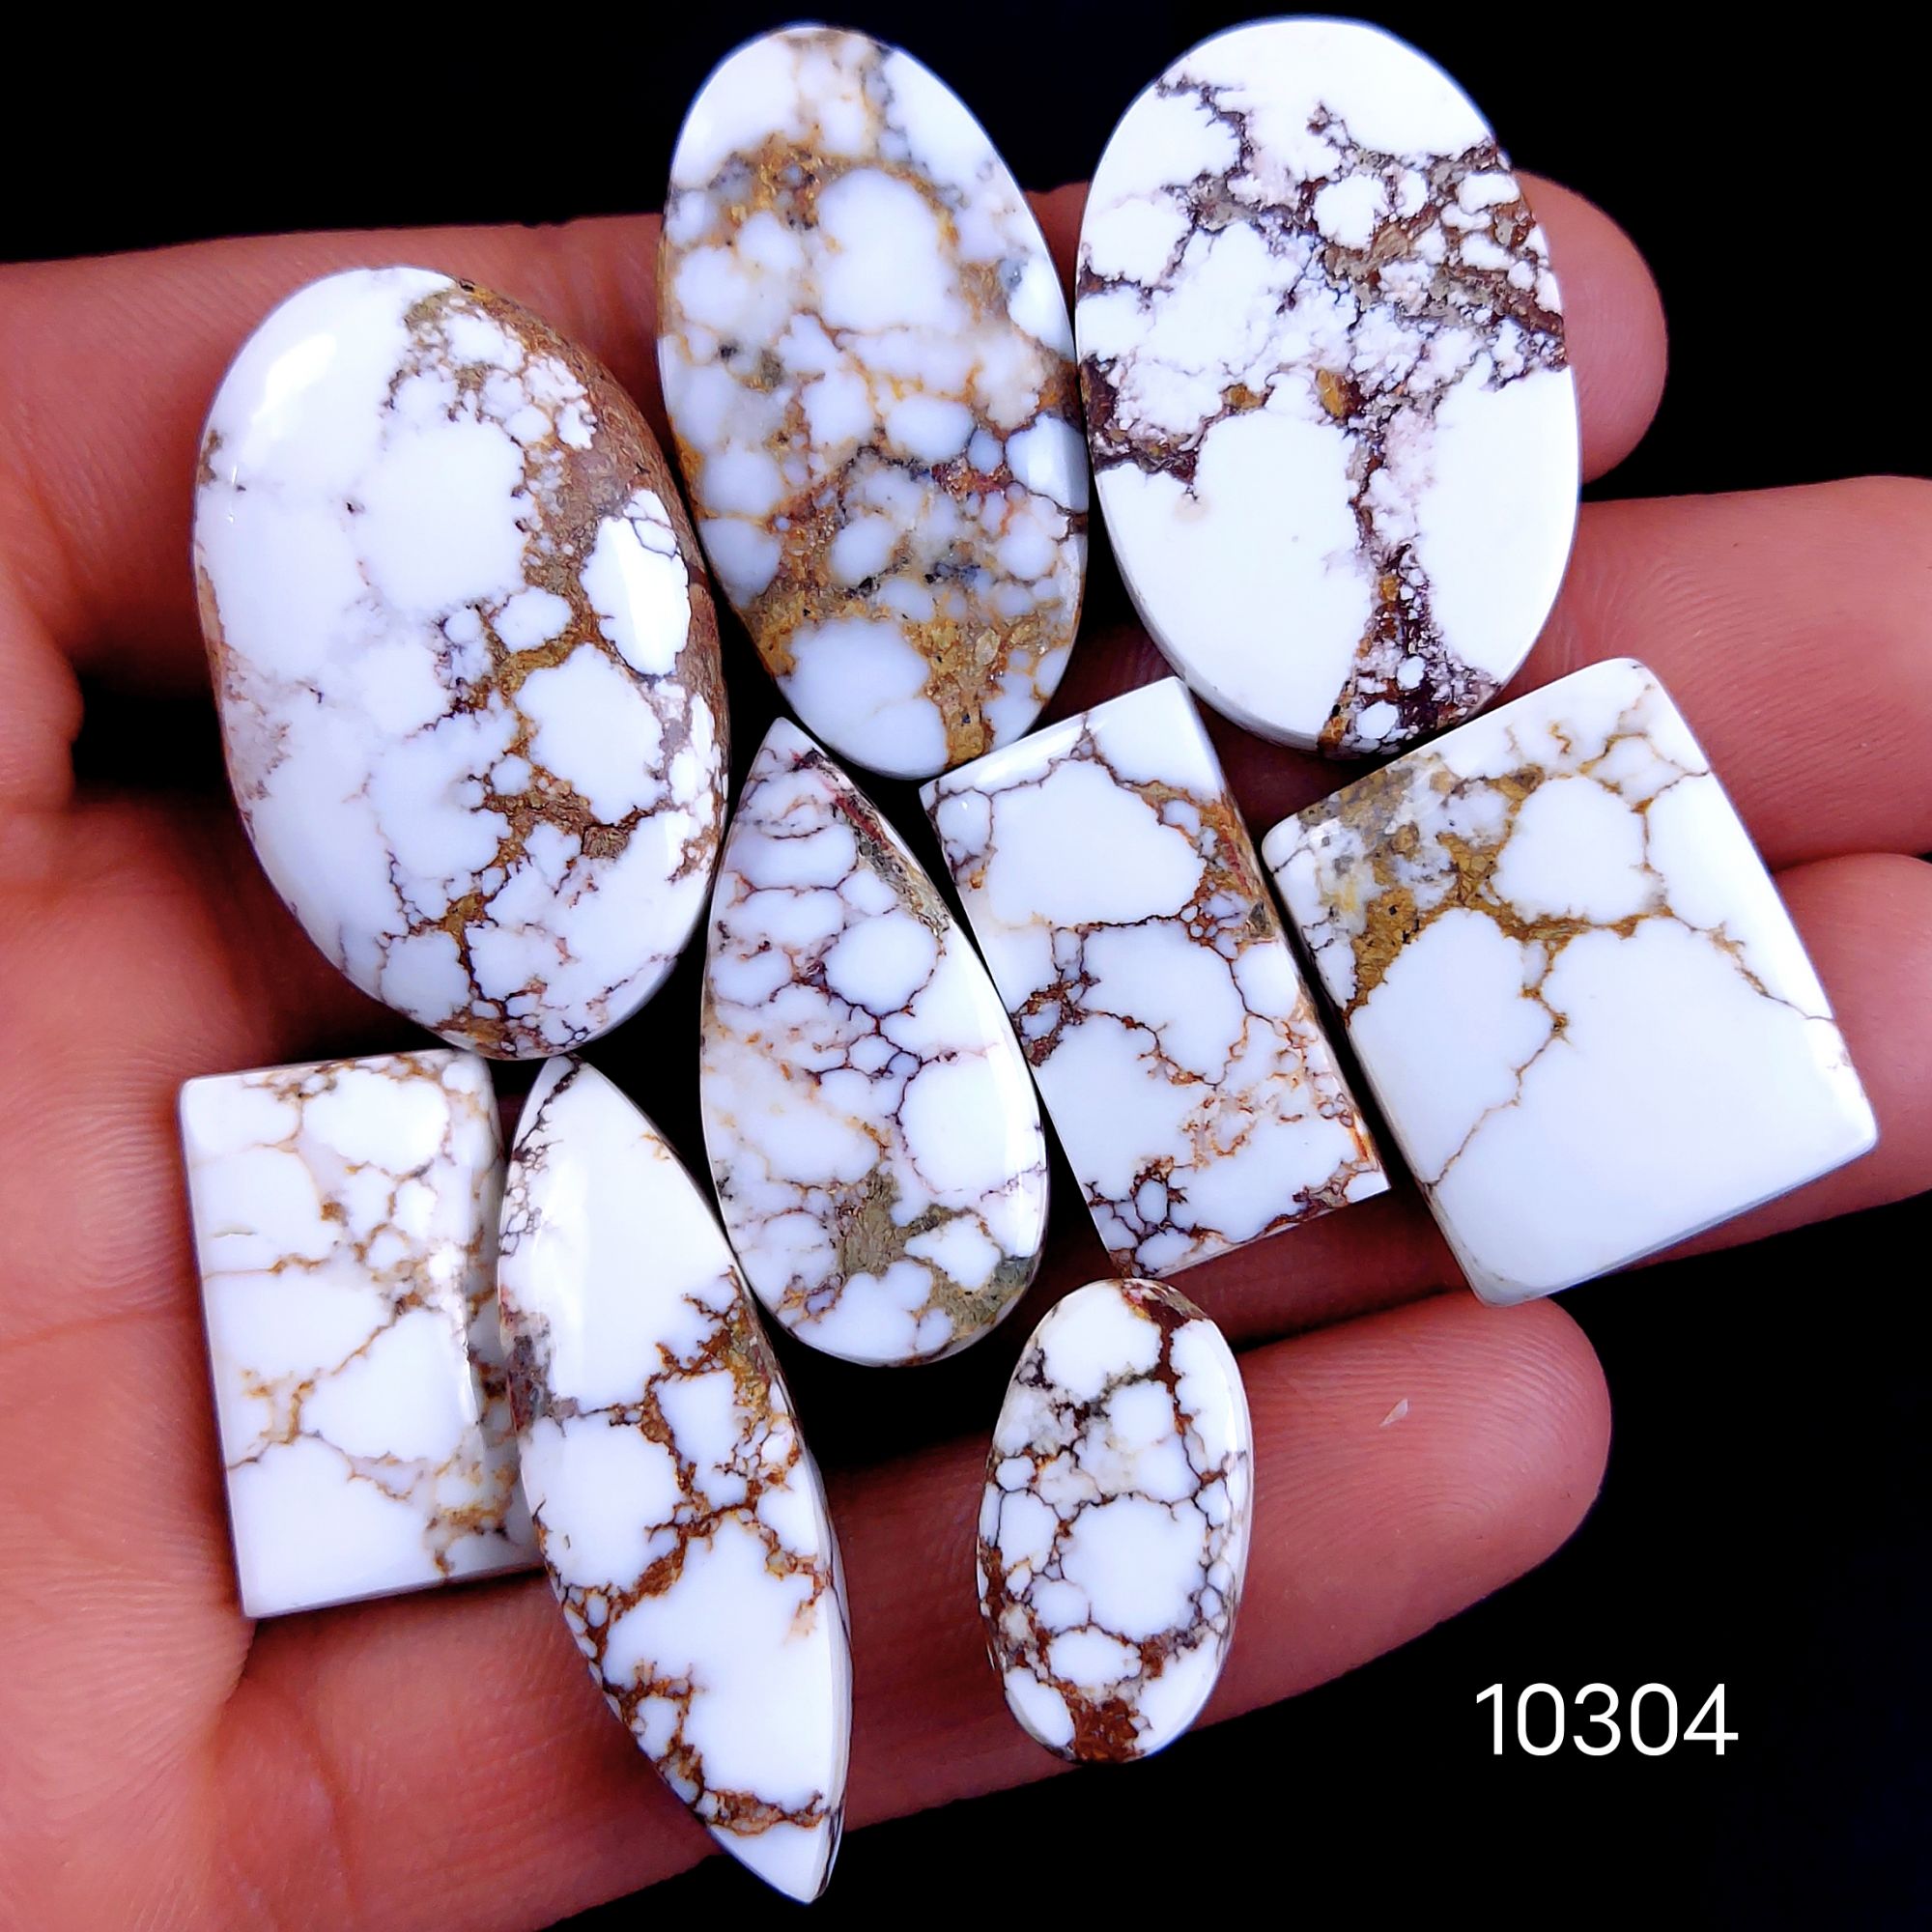 9Pc 235Cts Natural Wild Horse Magnesite Turquoise Cabochon Polished Loose Gemstone Flat Back Multi Jewelry Making Crystal  35x20 20x10mm #10304